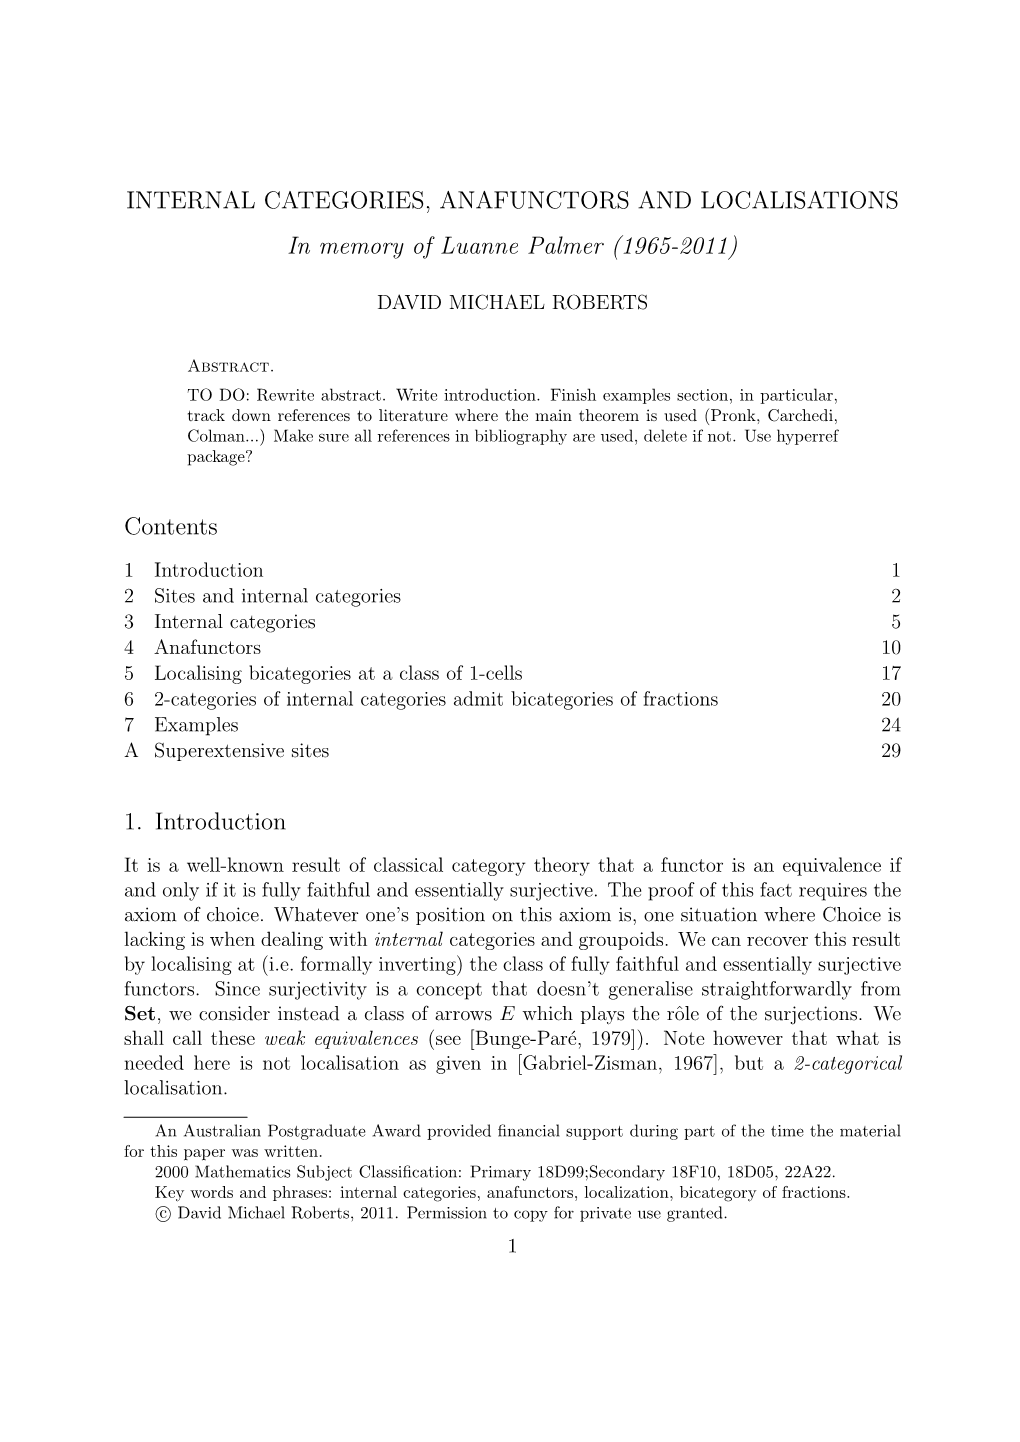 INTERNAL CATEGORIES, ANAFUNCTORS and LOCALISATIONS in Memory of Luanne Palmer (1965-2011)